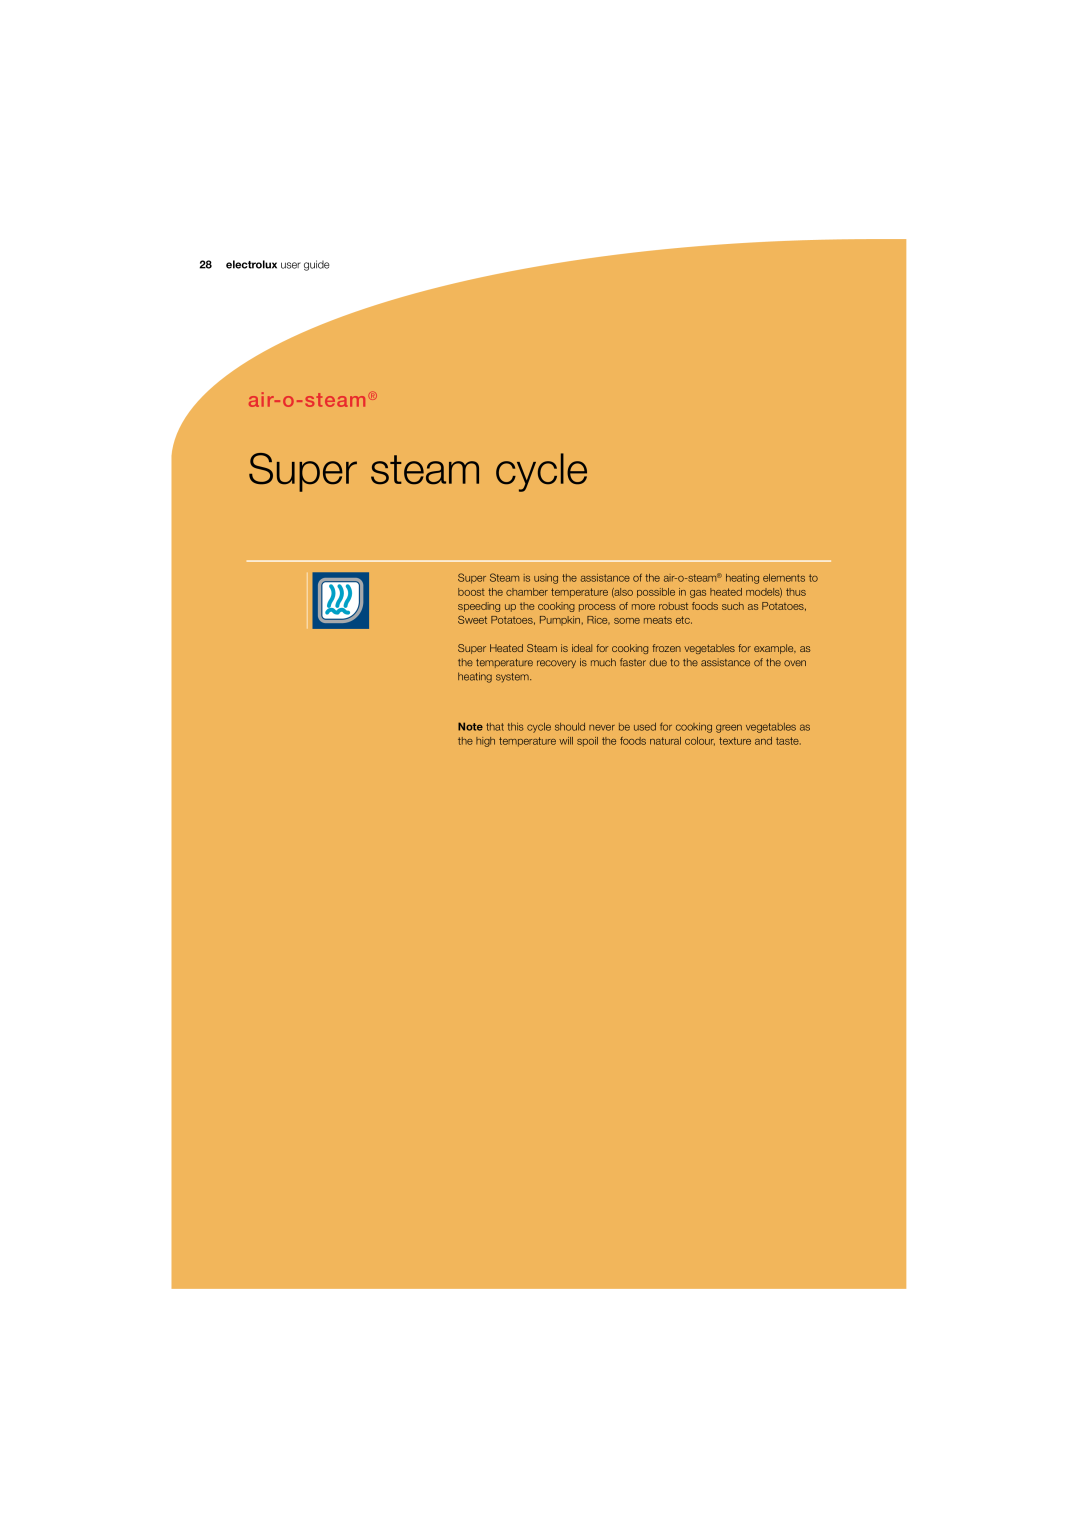 Electrolux 180 manual Super steam cycle, air-o-steam, electrolux user guide 